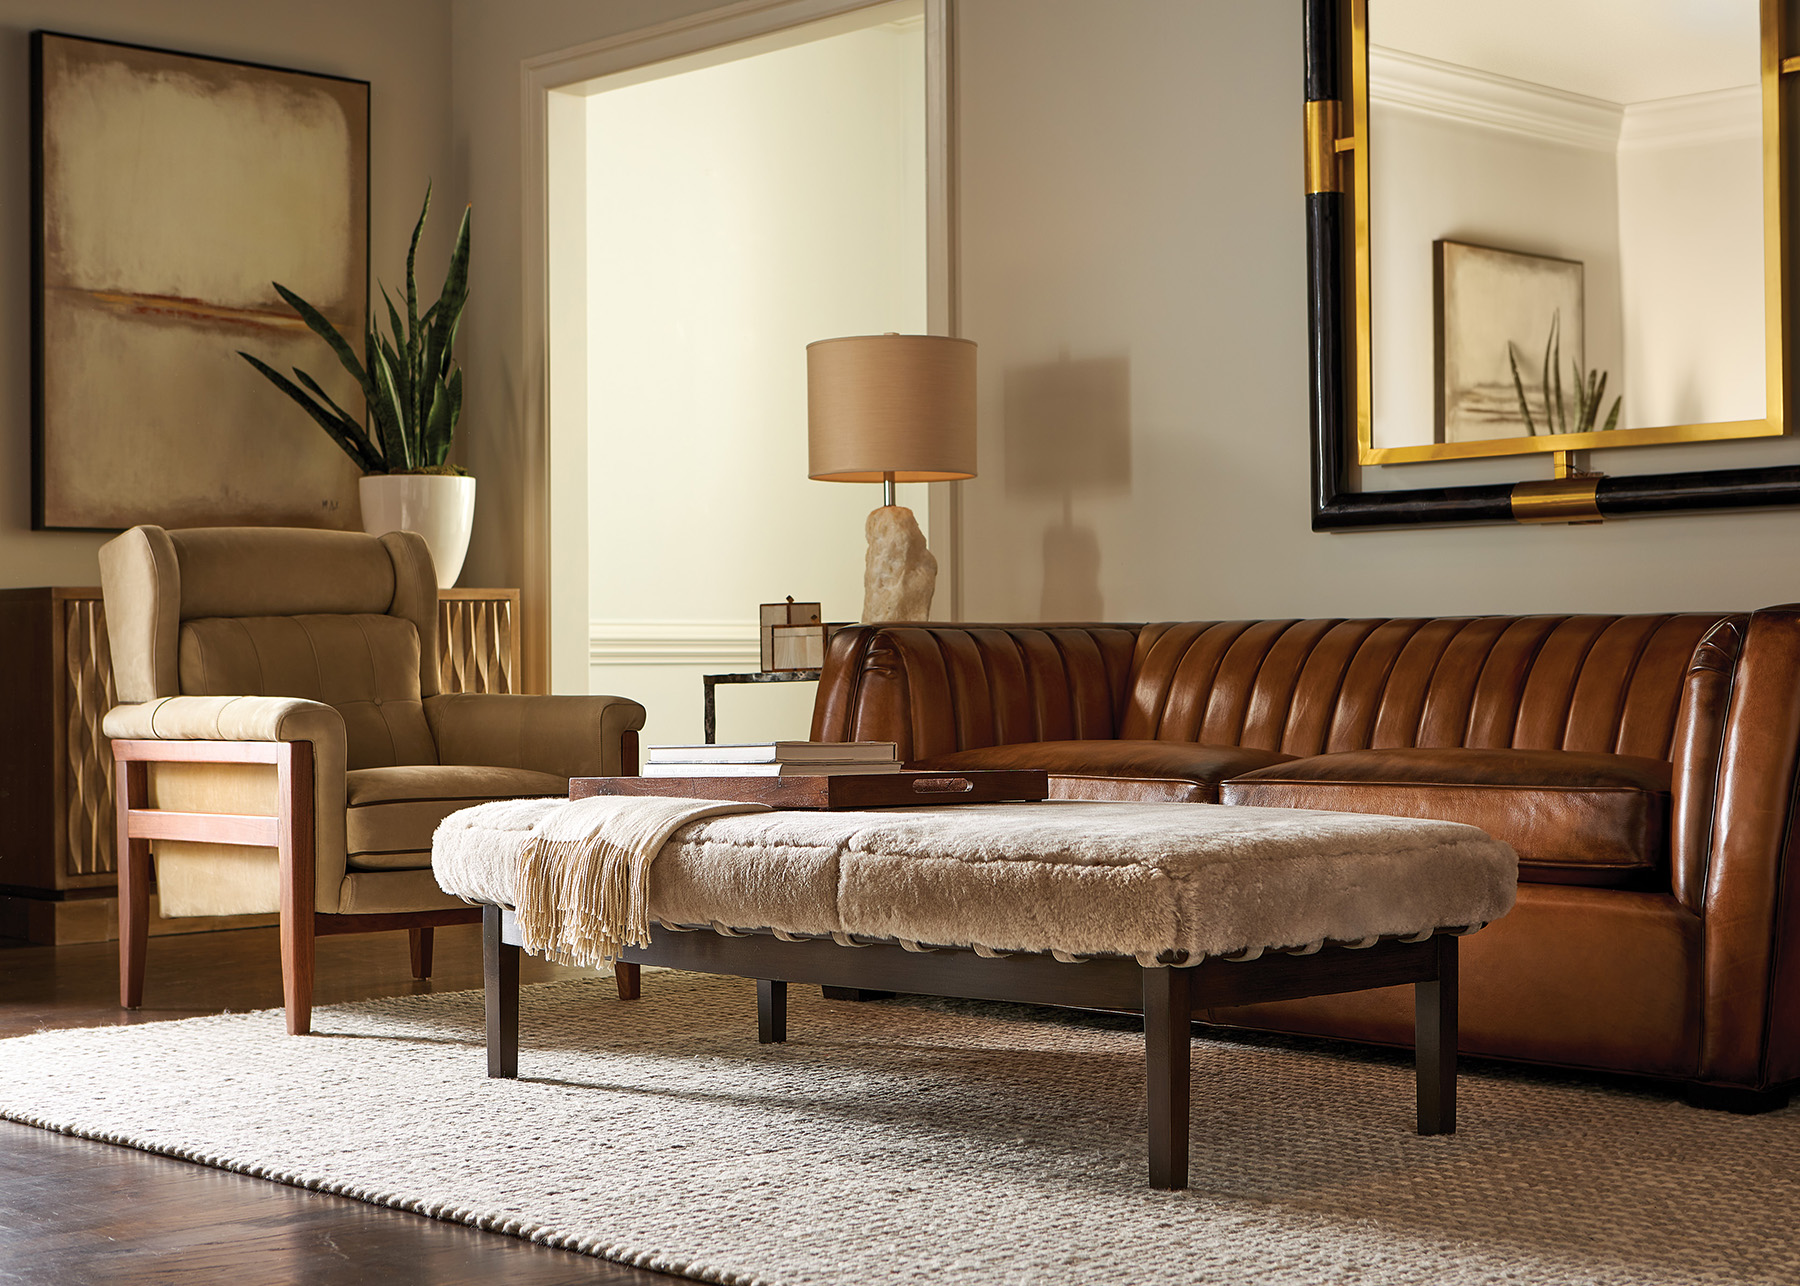 Aviator Sofa shown in Hyde Park Tan Patina Burnished with Java finish.  Heston Chair shown in Cottswald Burlap with Hand Rubbed Walnut finish.  Contrasting welts in Cottswald Dakota Brown.  Zelis Bench shown in Fleecy Fog with Lyric Shadow straps and Buck finish.